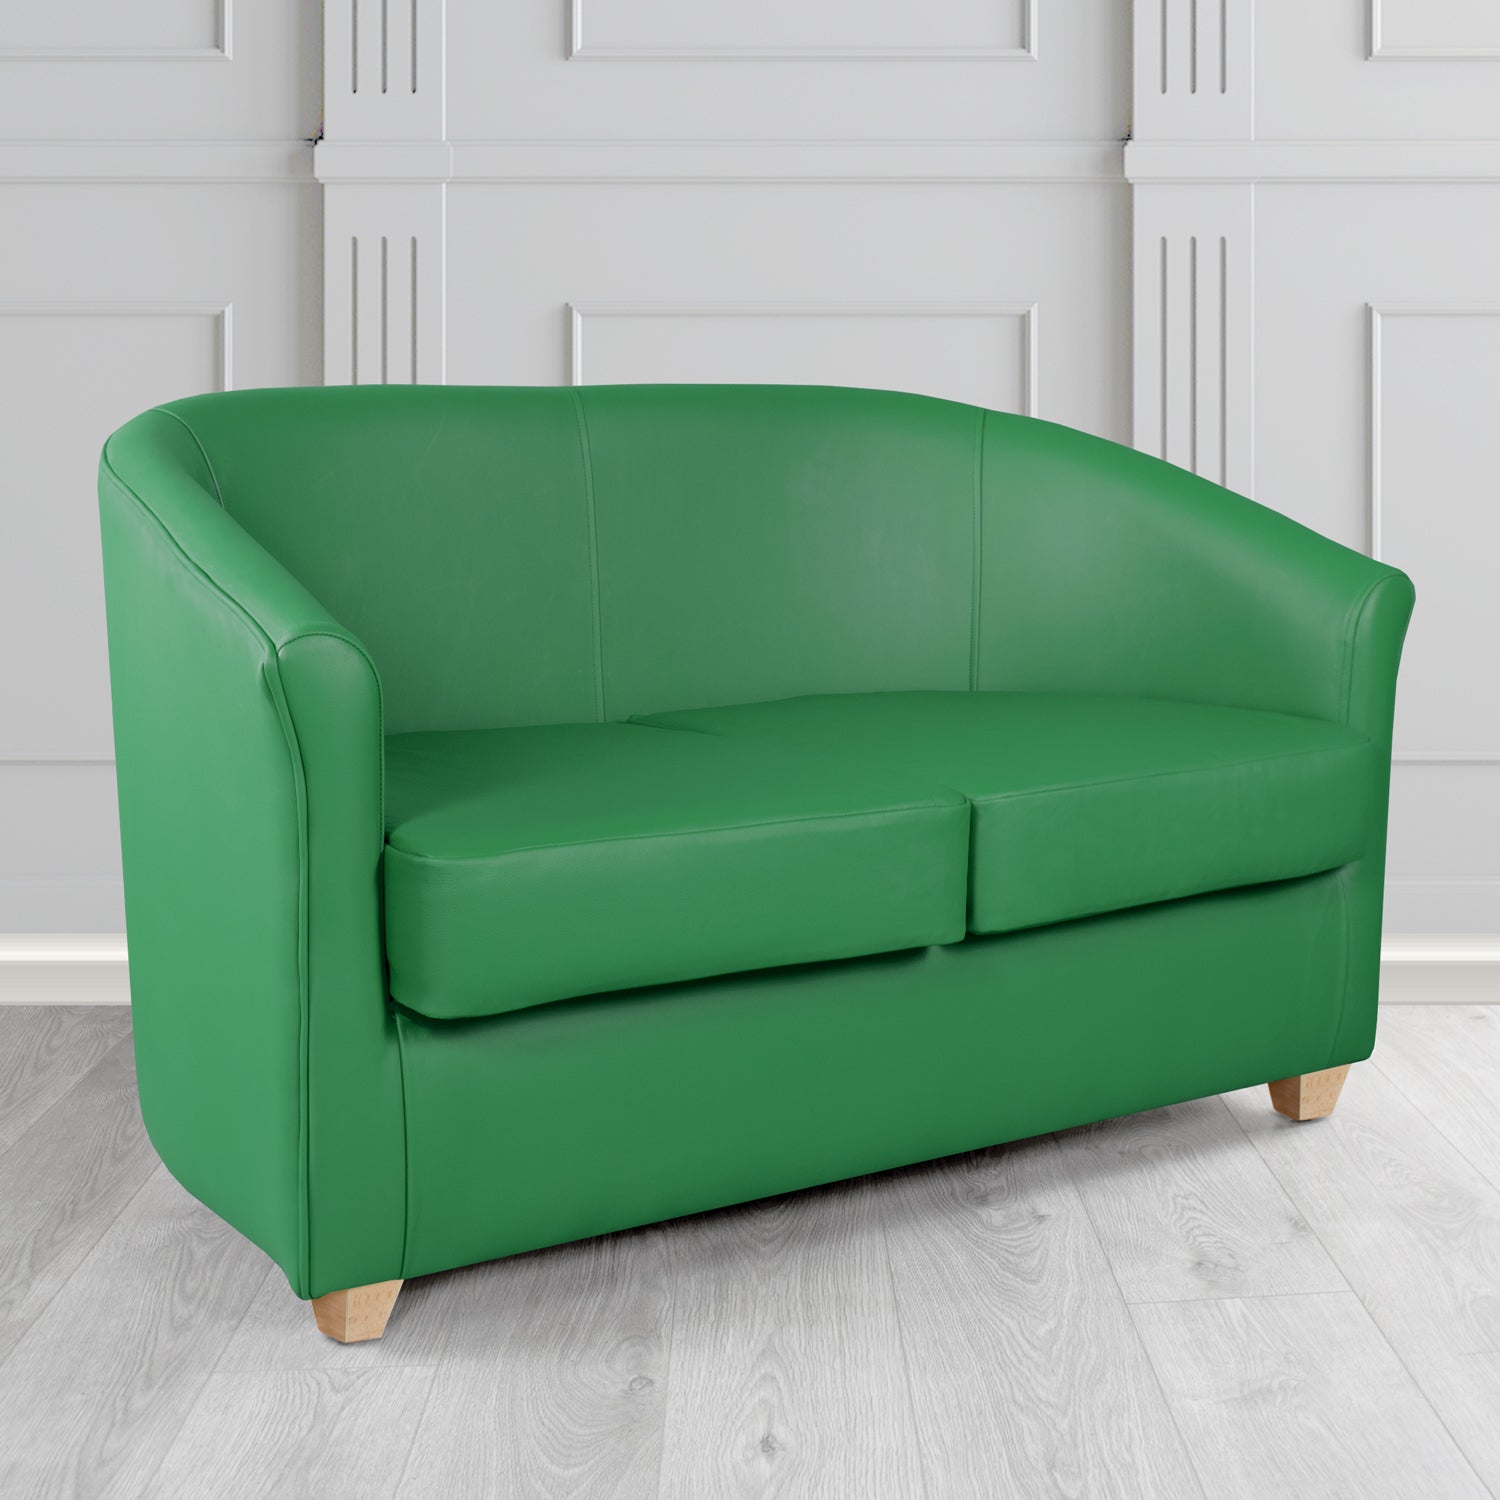 Cannes 2 Seater Tub Sofa in Just Colour Laurel Crib 5 Faux Leather - The Tub Chair Shop